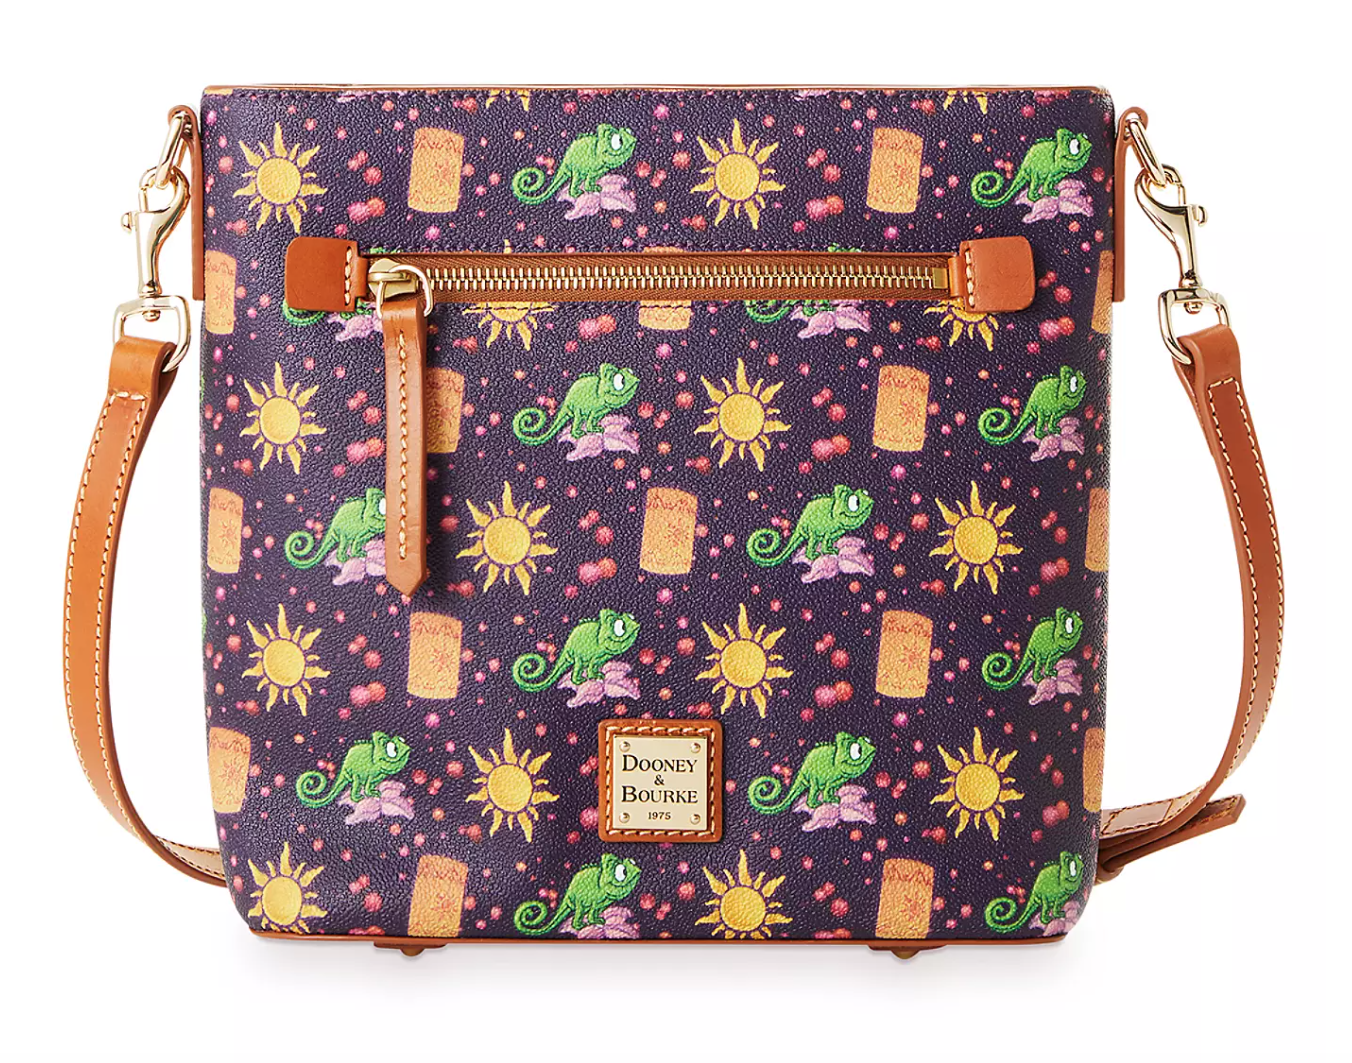 Cyber Monday 2020: The best Dooney & Bourke outlet deals right now